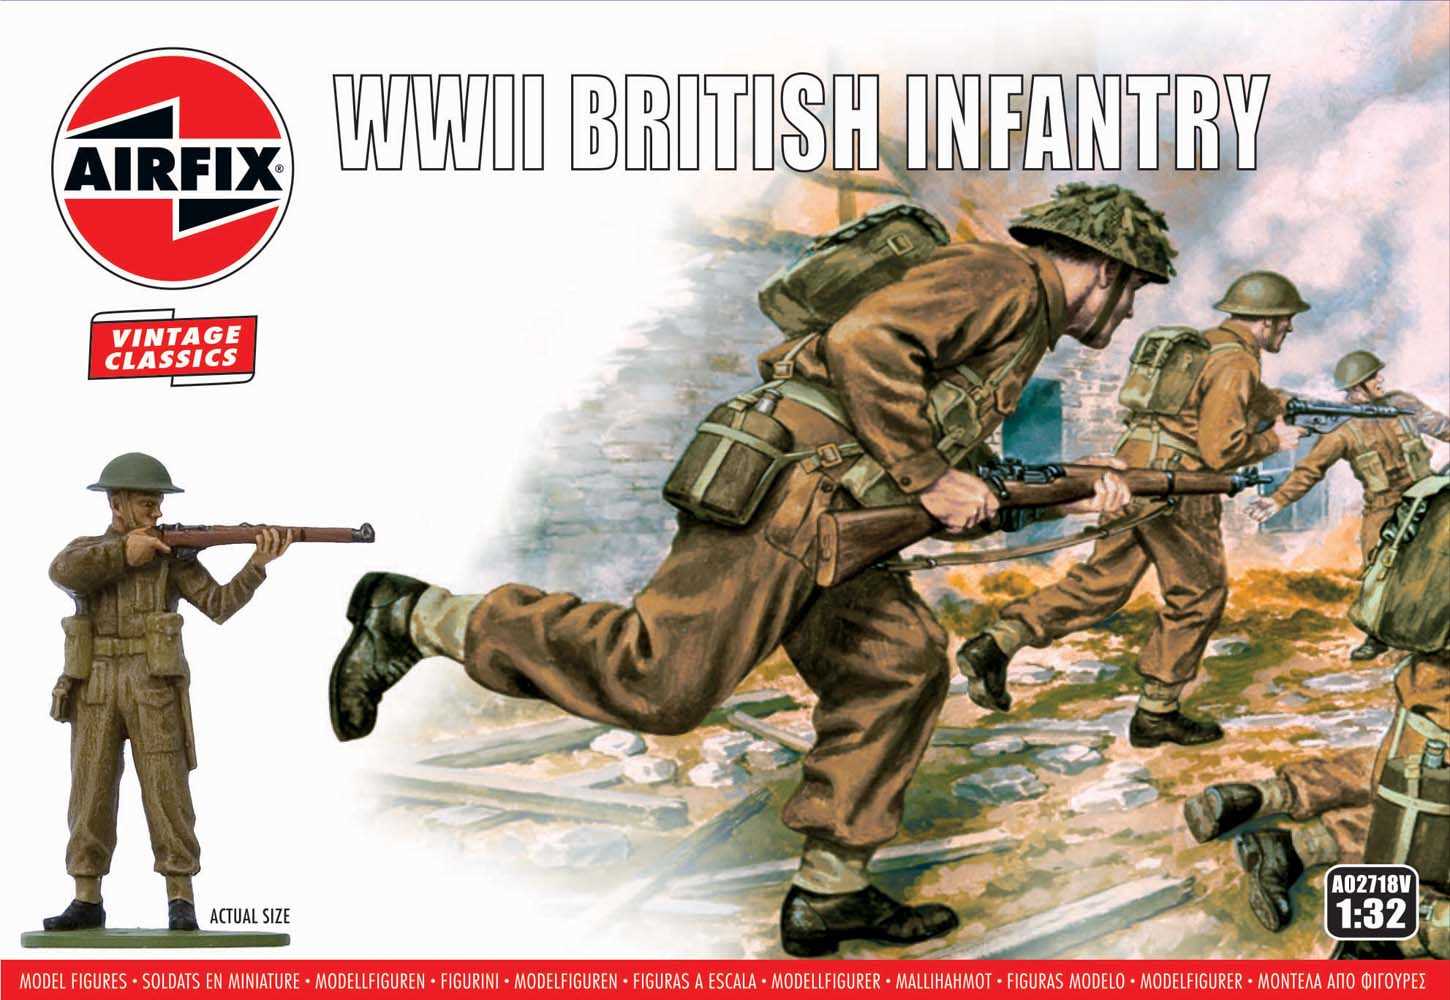 Airfix Classic Kit VINTAGE figurky A02718V - WWII British Infantry (1:32)